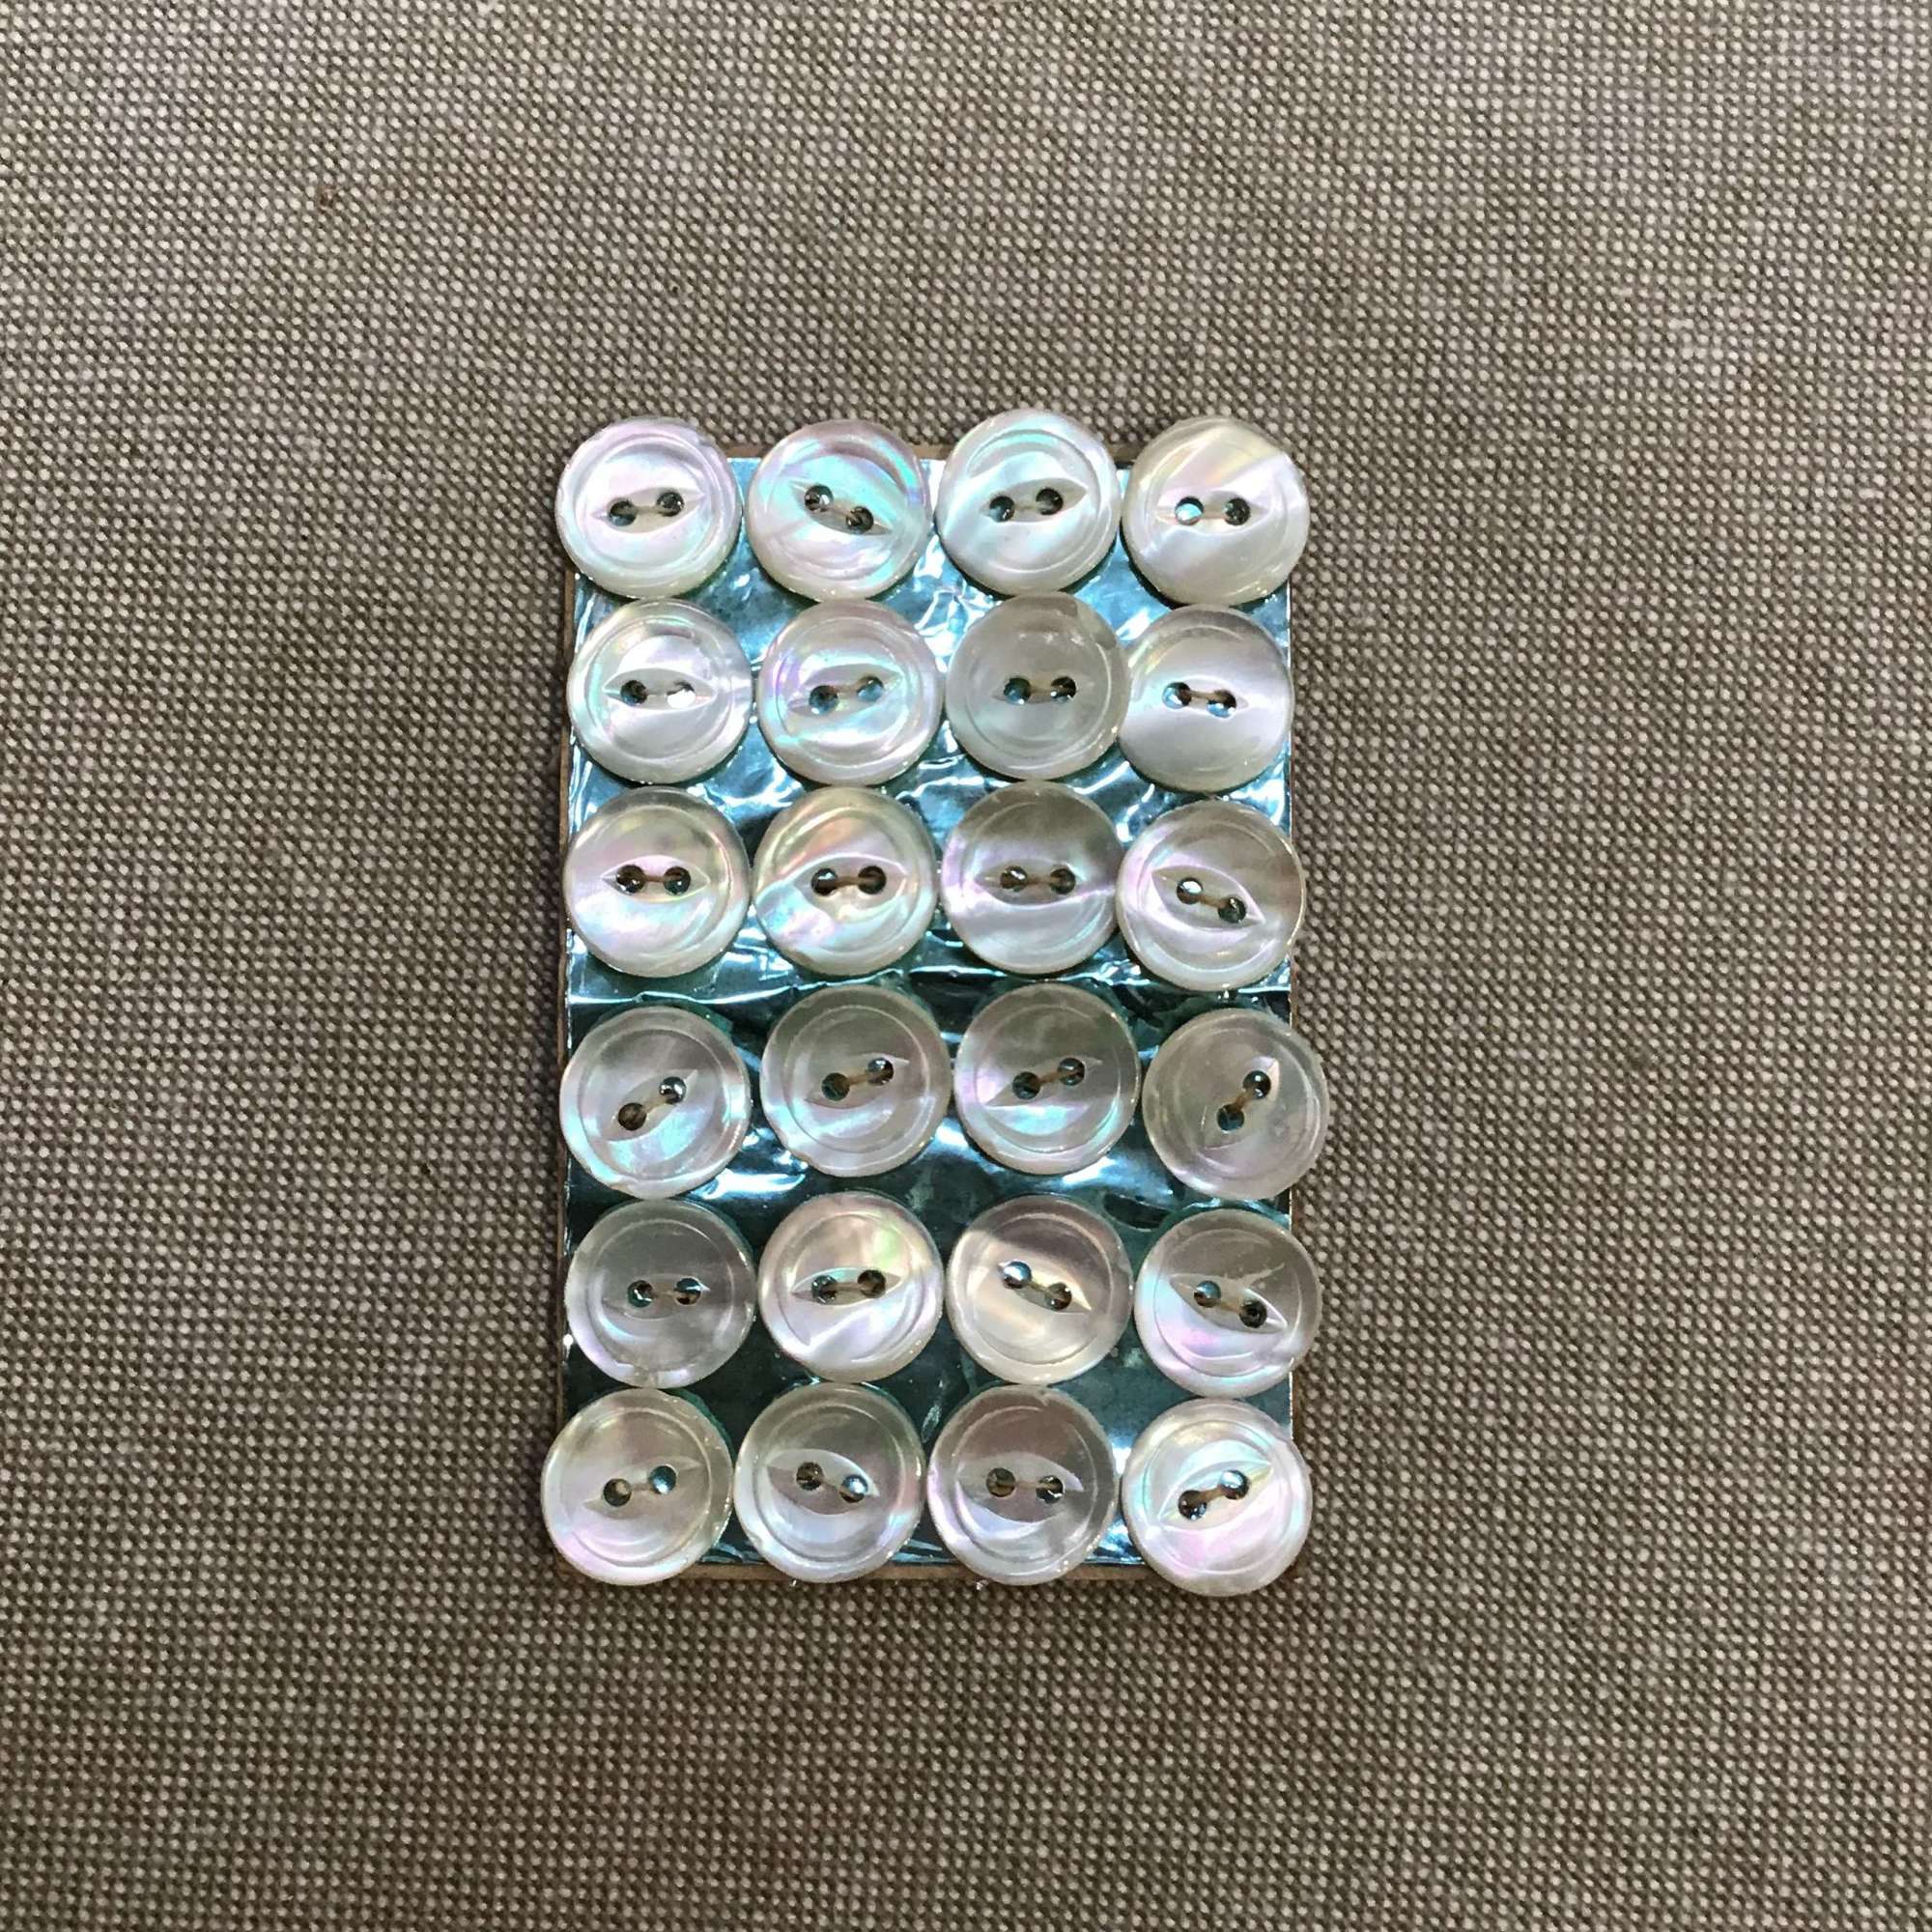 24 mother of pearl buttons 1cm diameter